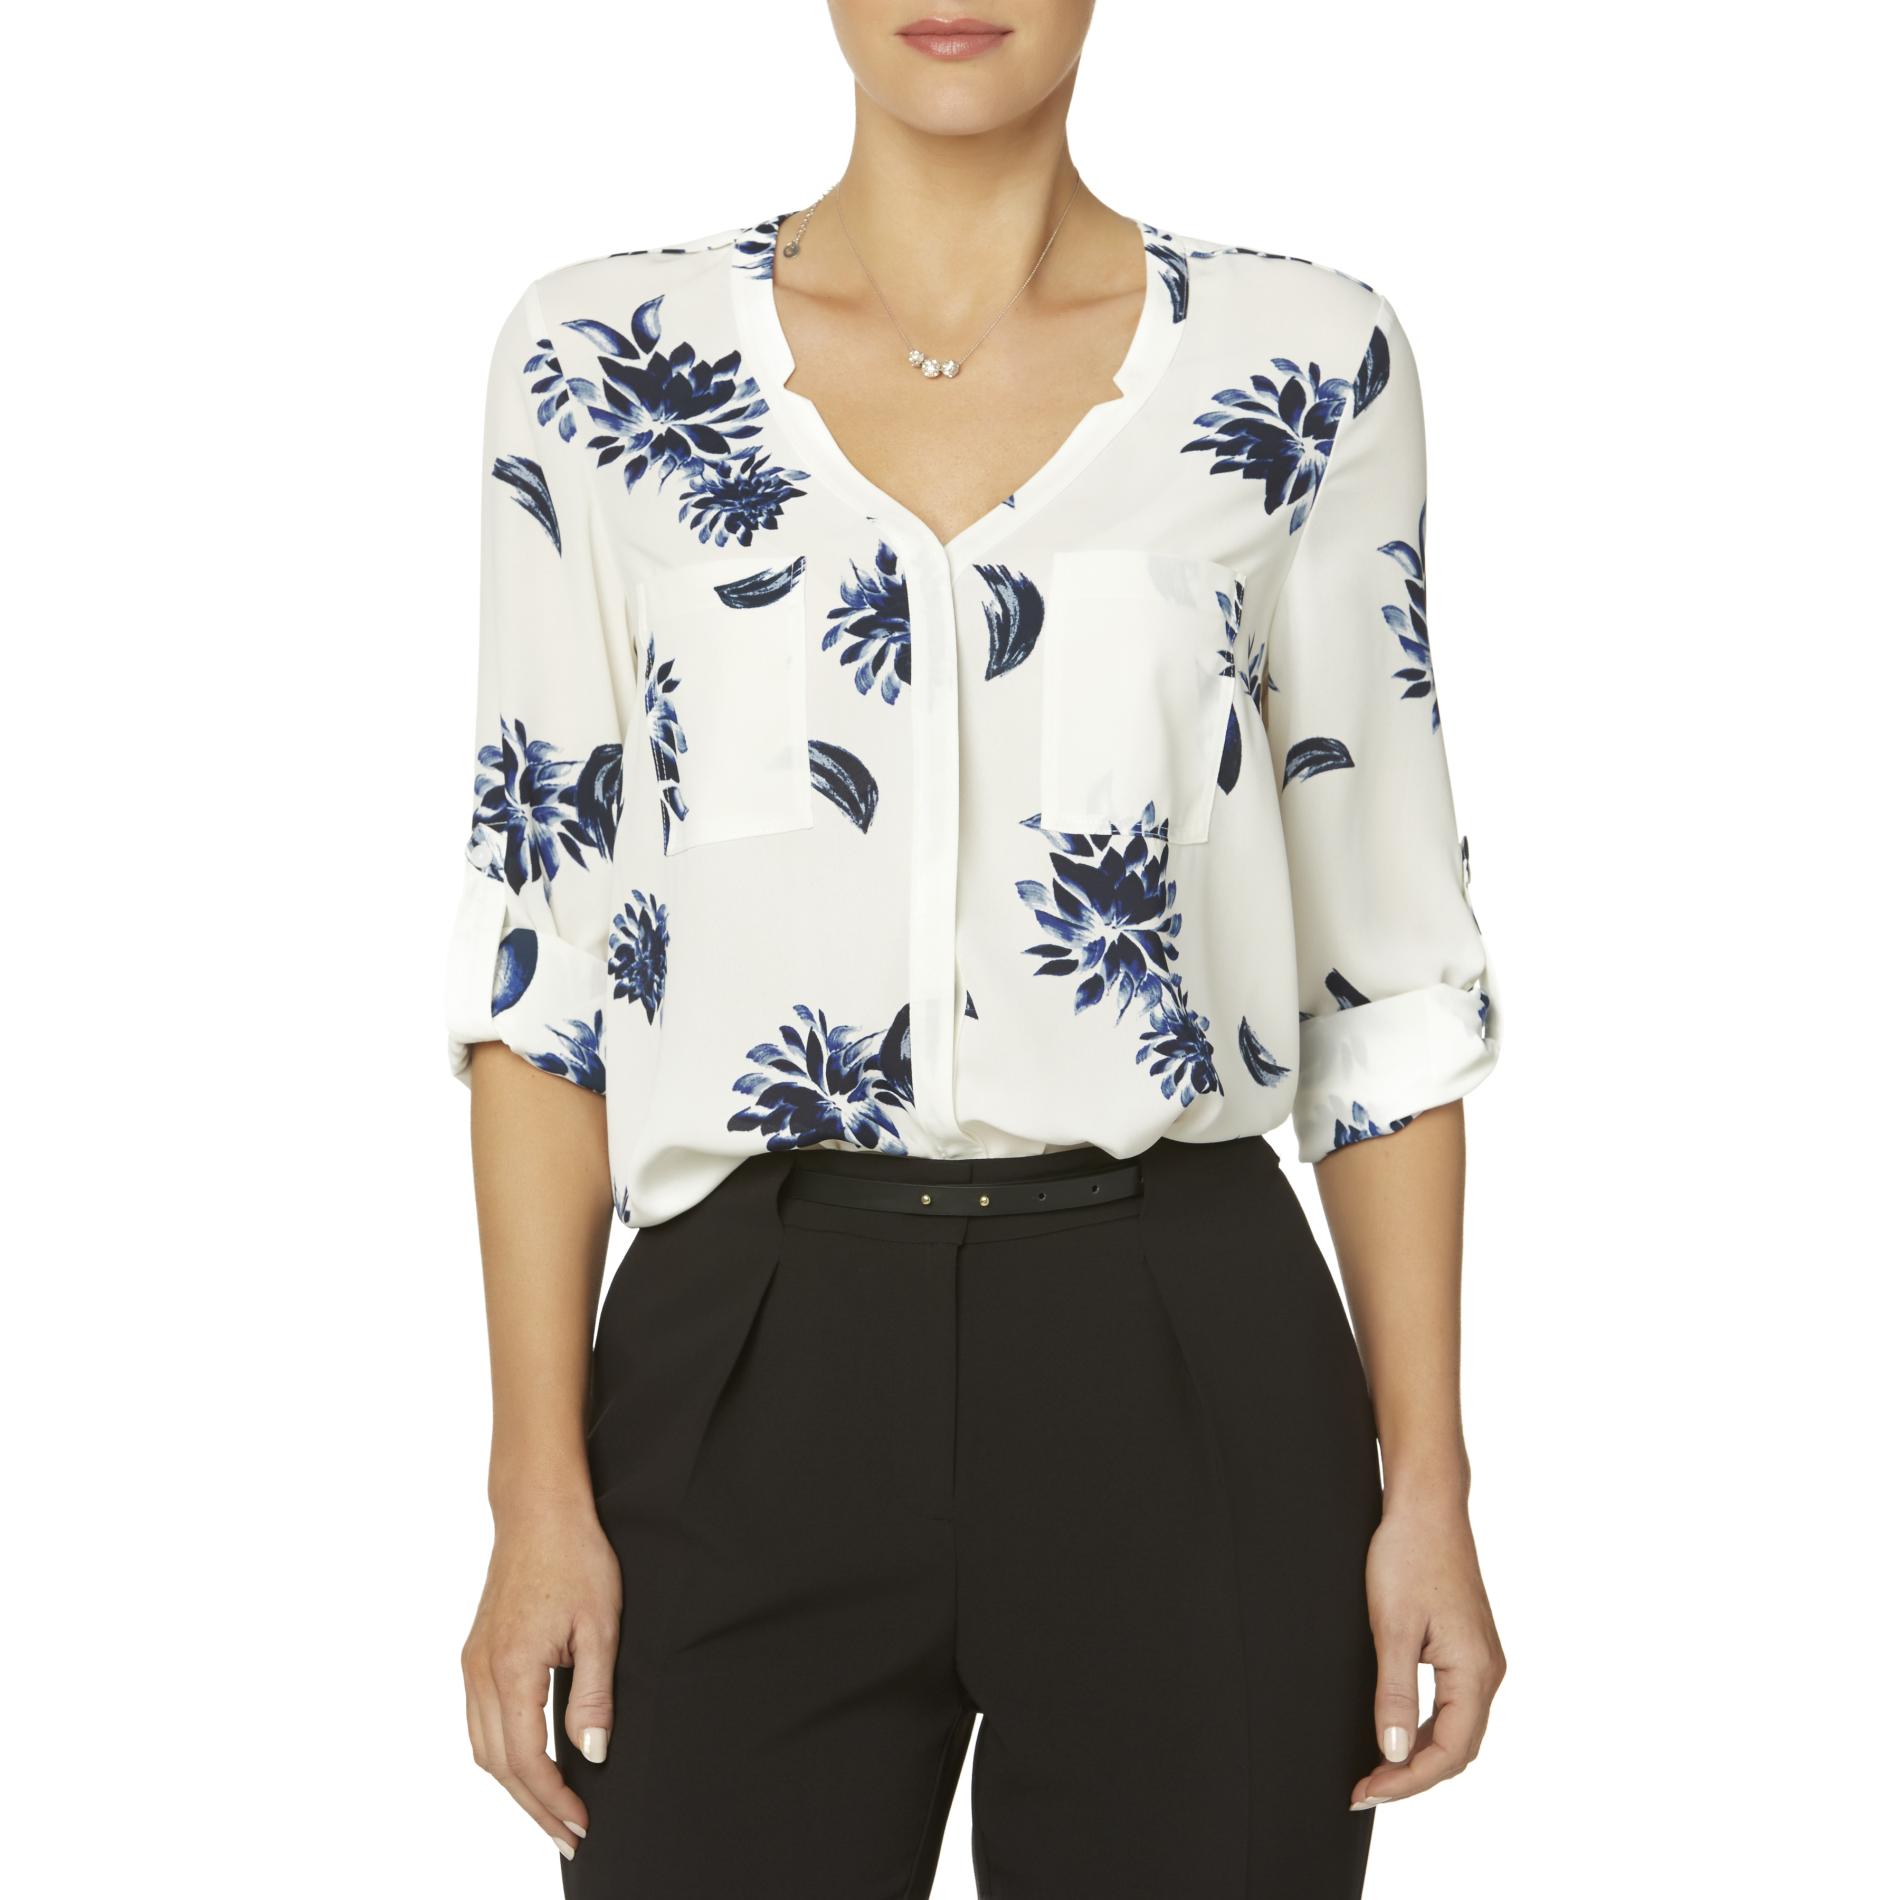 Simply Styled Women's Chiffon Blouse - Floral